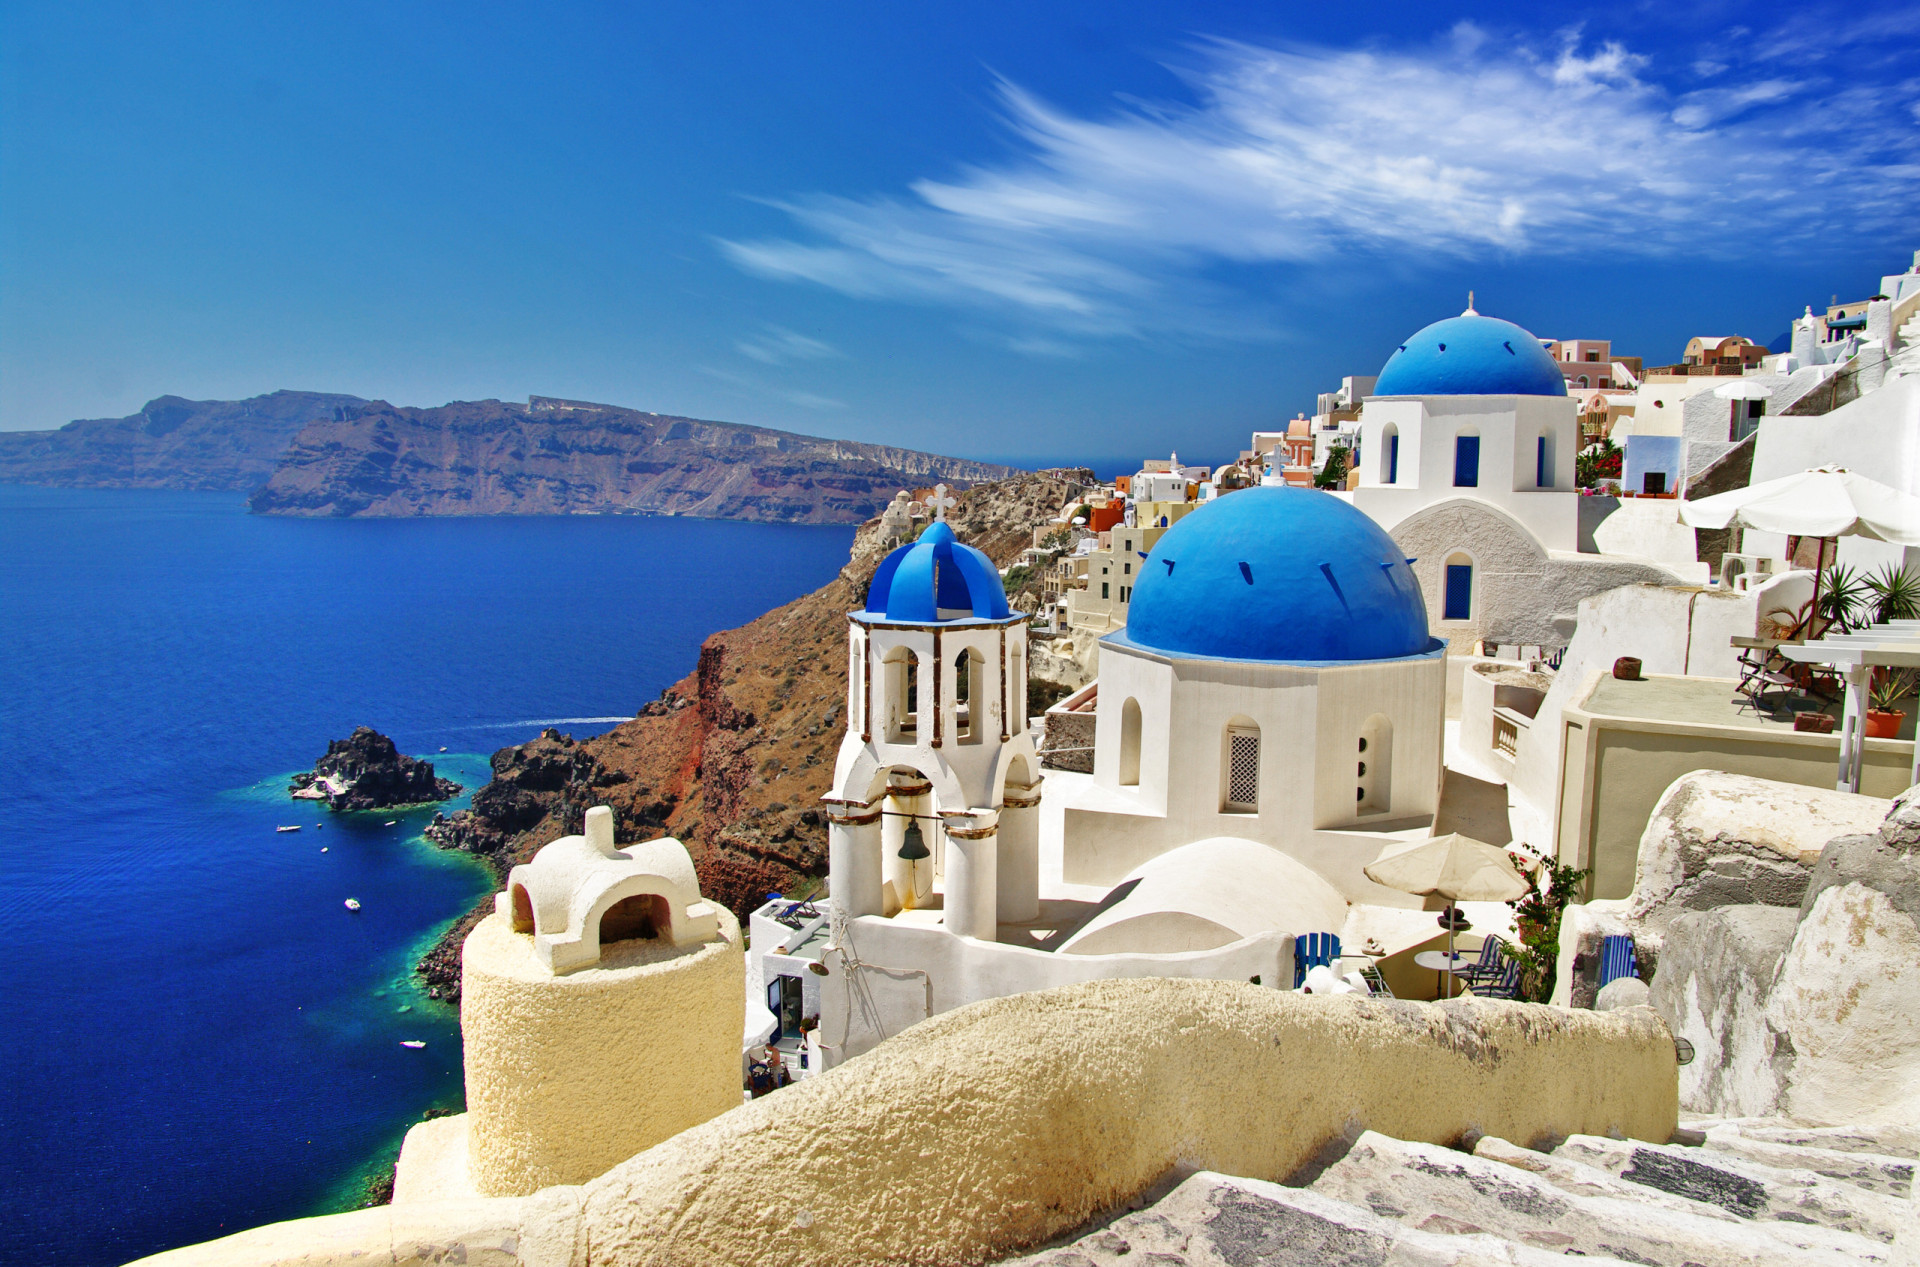 <p>The price you pay in Greece depends on the standard and size of your accommodation. It tends to be around €4 (US$4.36) per night.</p><p><a href="https://www.msn.com/en-my/community/channel/vid-7xx8mnucu55yw63we9va2gwr7uihbxwc68fxqp25x6tg4ftibpra?cvid=94631541bc0f4f89bfd59158d696ad7e">Follow us and access great exclusive content every day</a></p>